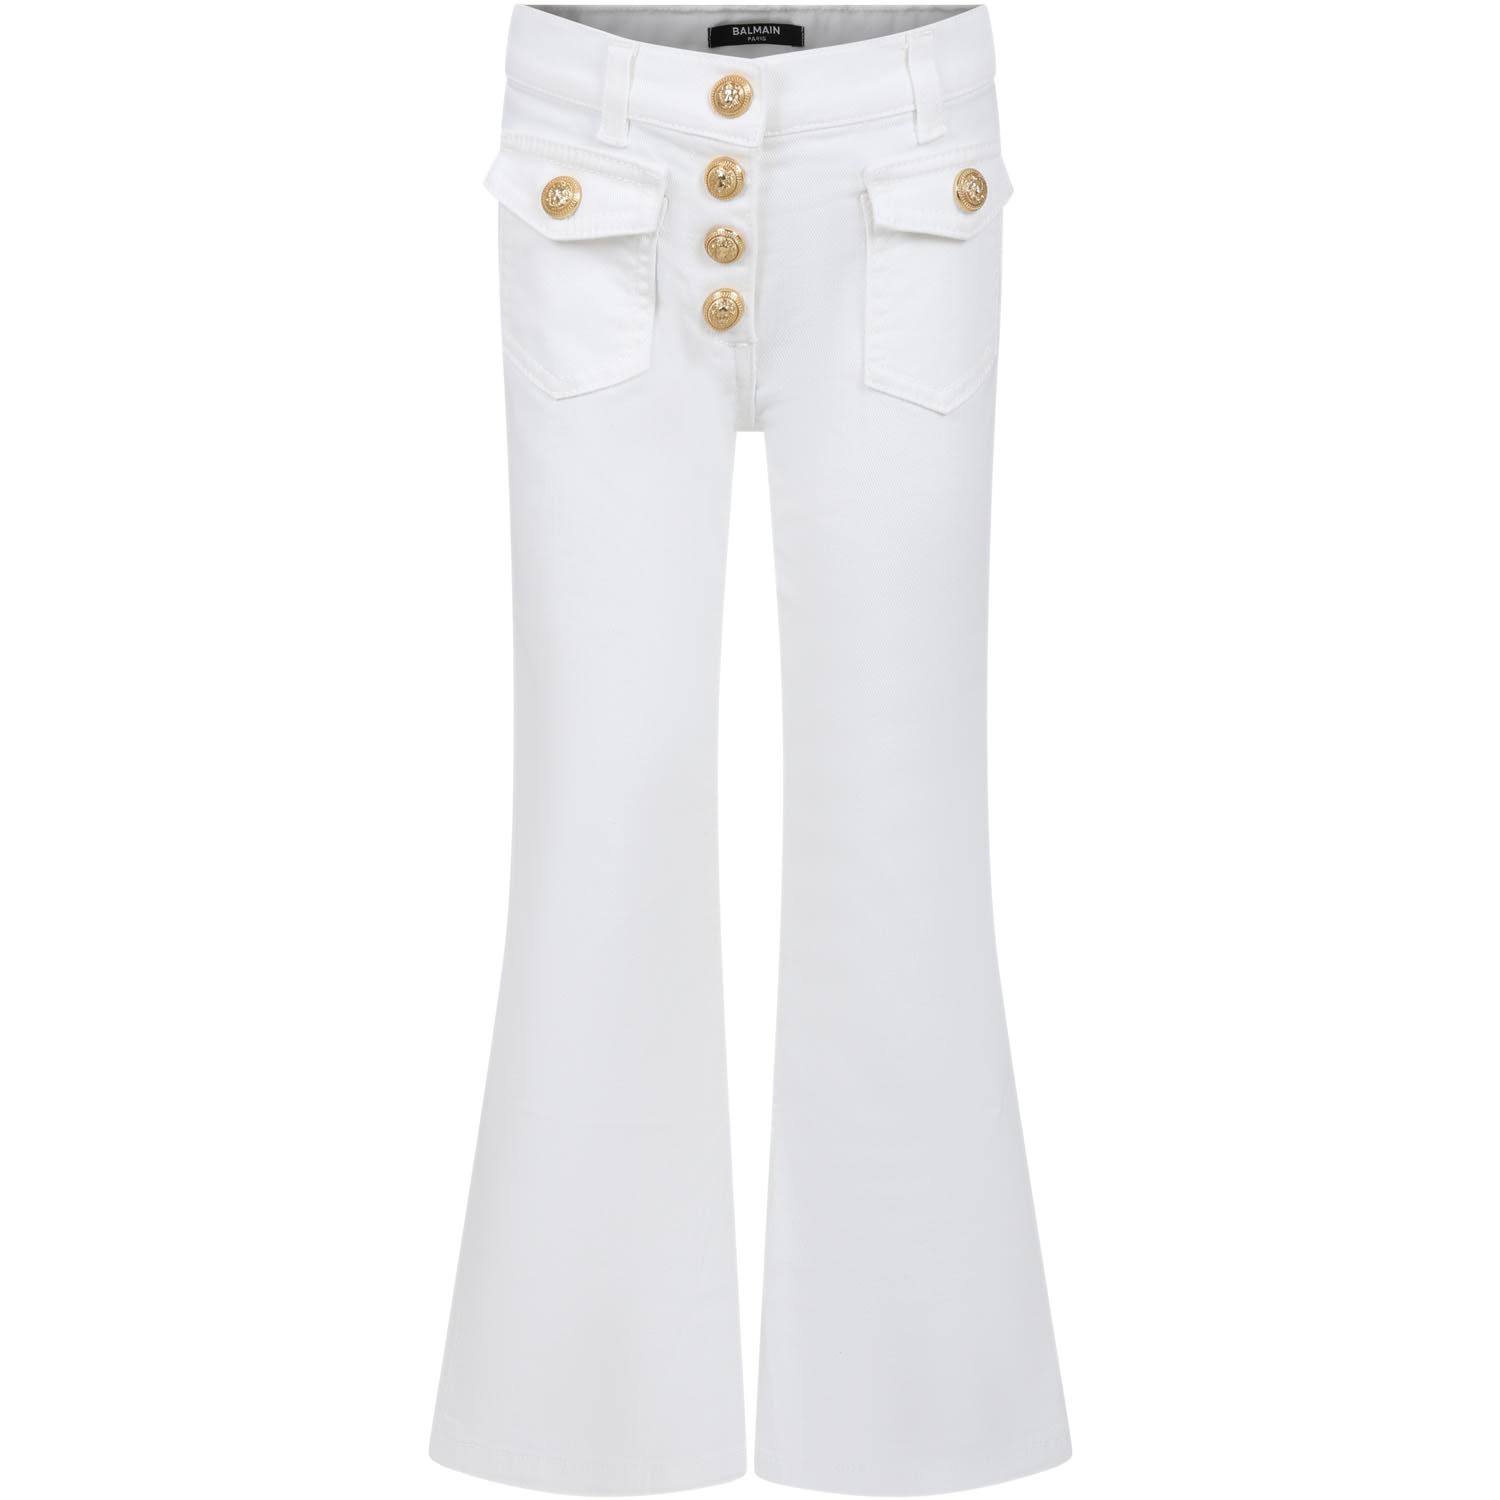 Balmain Kids' White Jeans For Girl With Gold Buttons